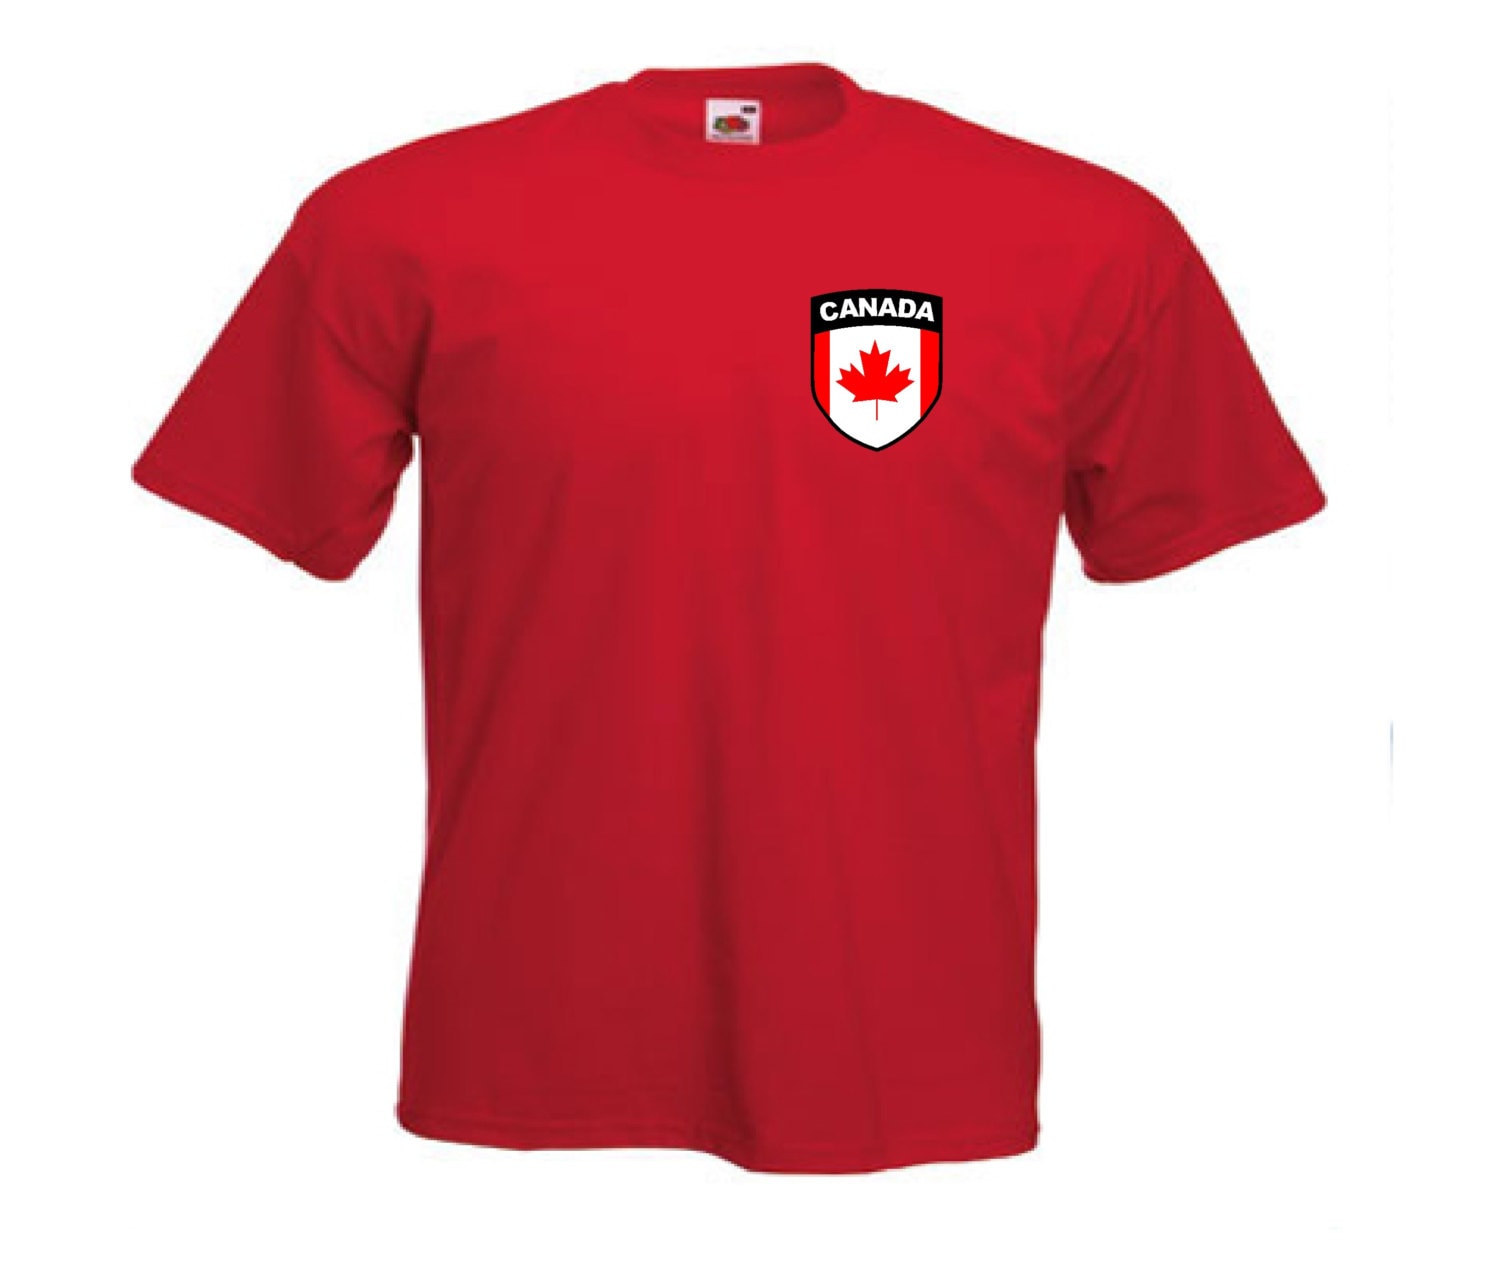 All Youth Sizes Canada Canadian Kids Football Soccer Team Short Sleeve T-shirt 